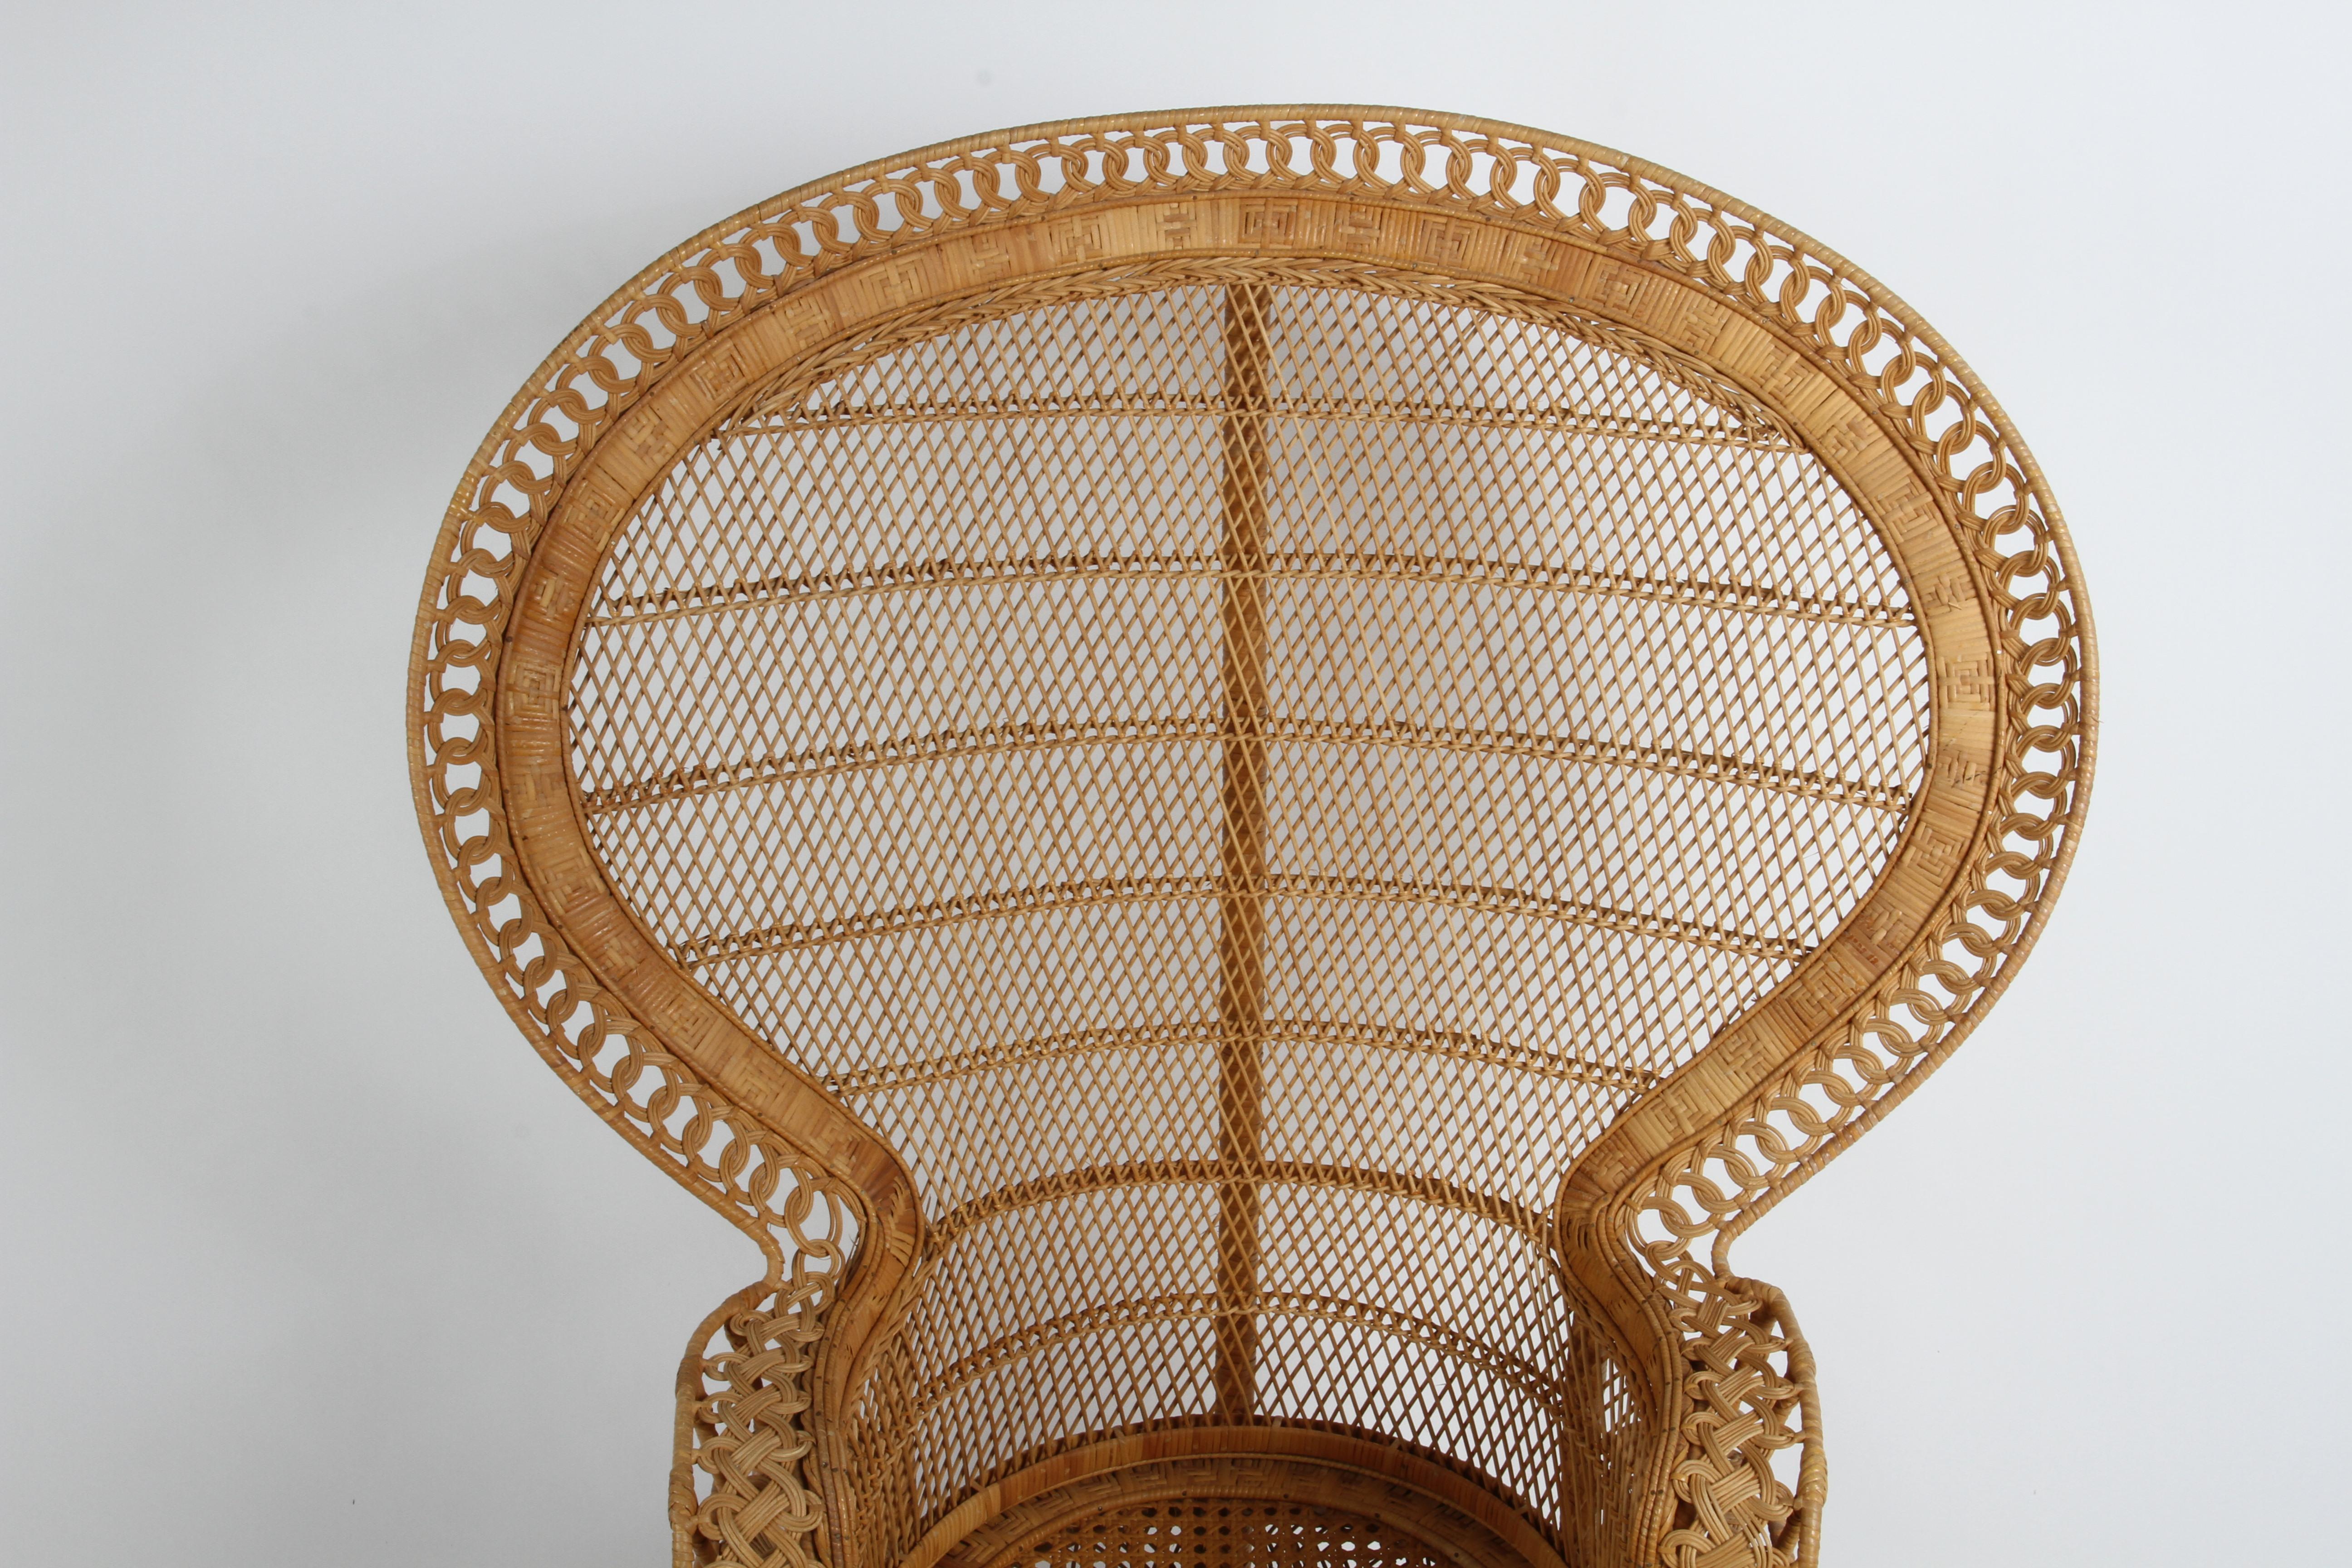 Bohemian Vintage 1970s Rattan & Wicker Handcrafted Boho Chic Emmanuelle Peacock Chair For Sale